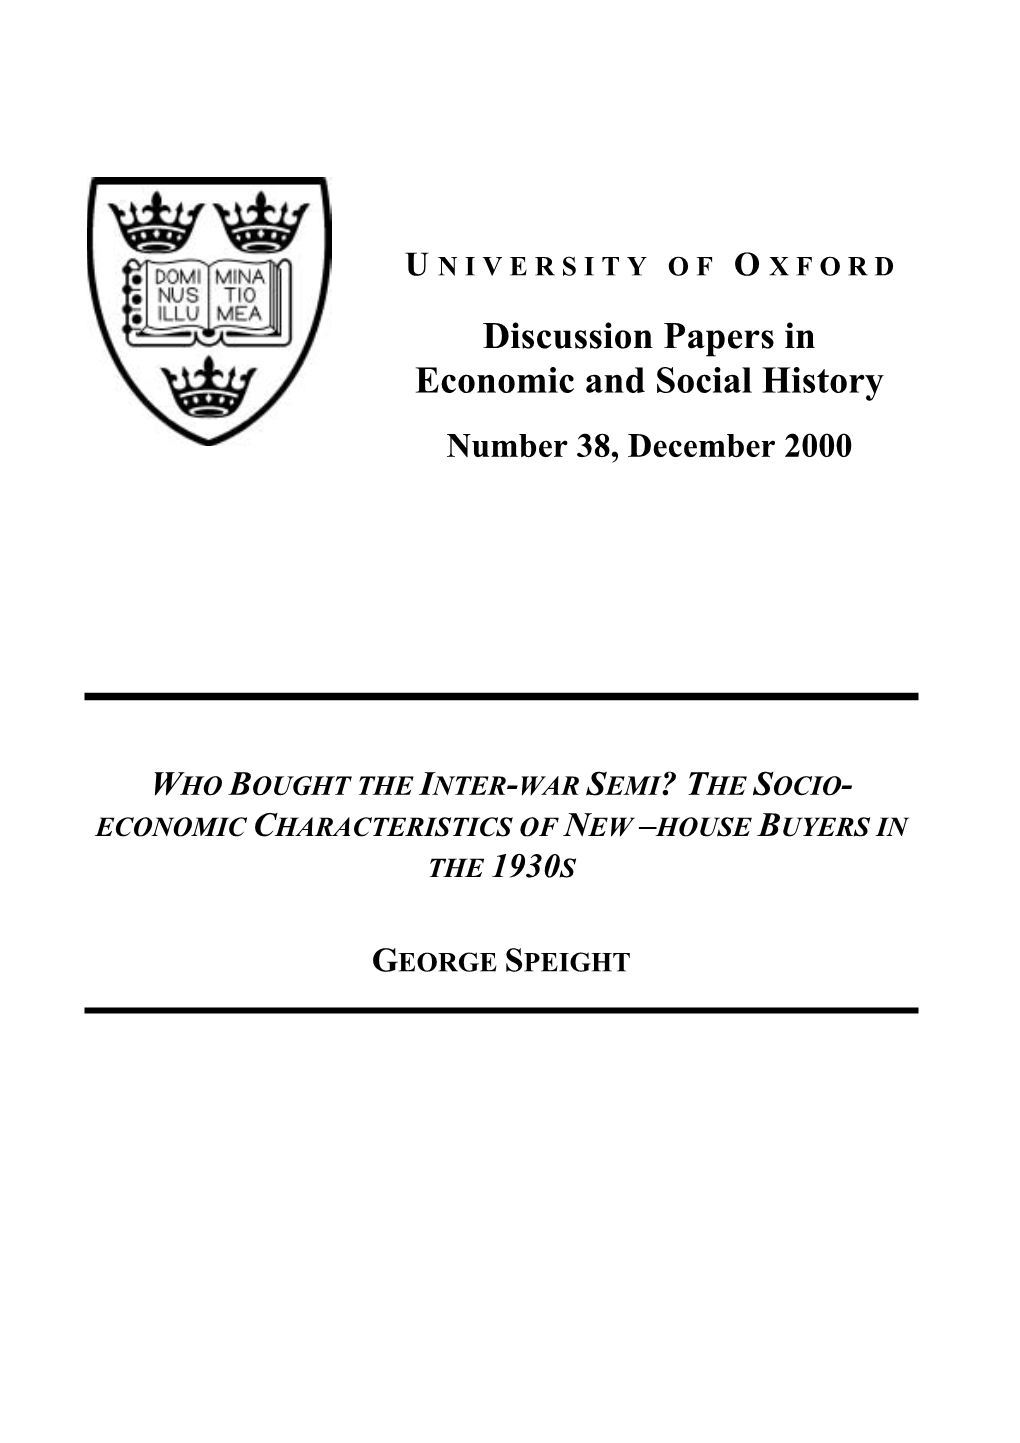 Discussion Papers in Economic and Social History Number 38, December 2000